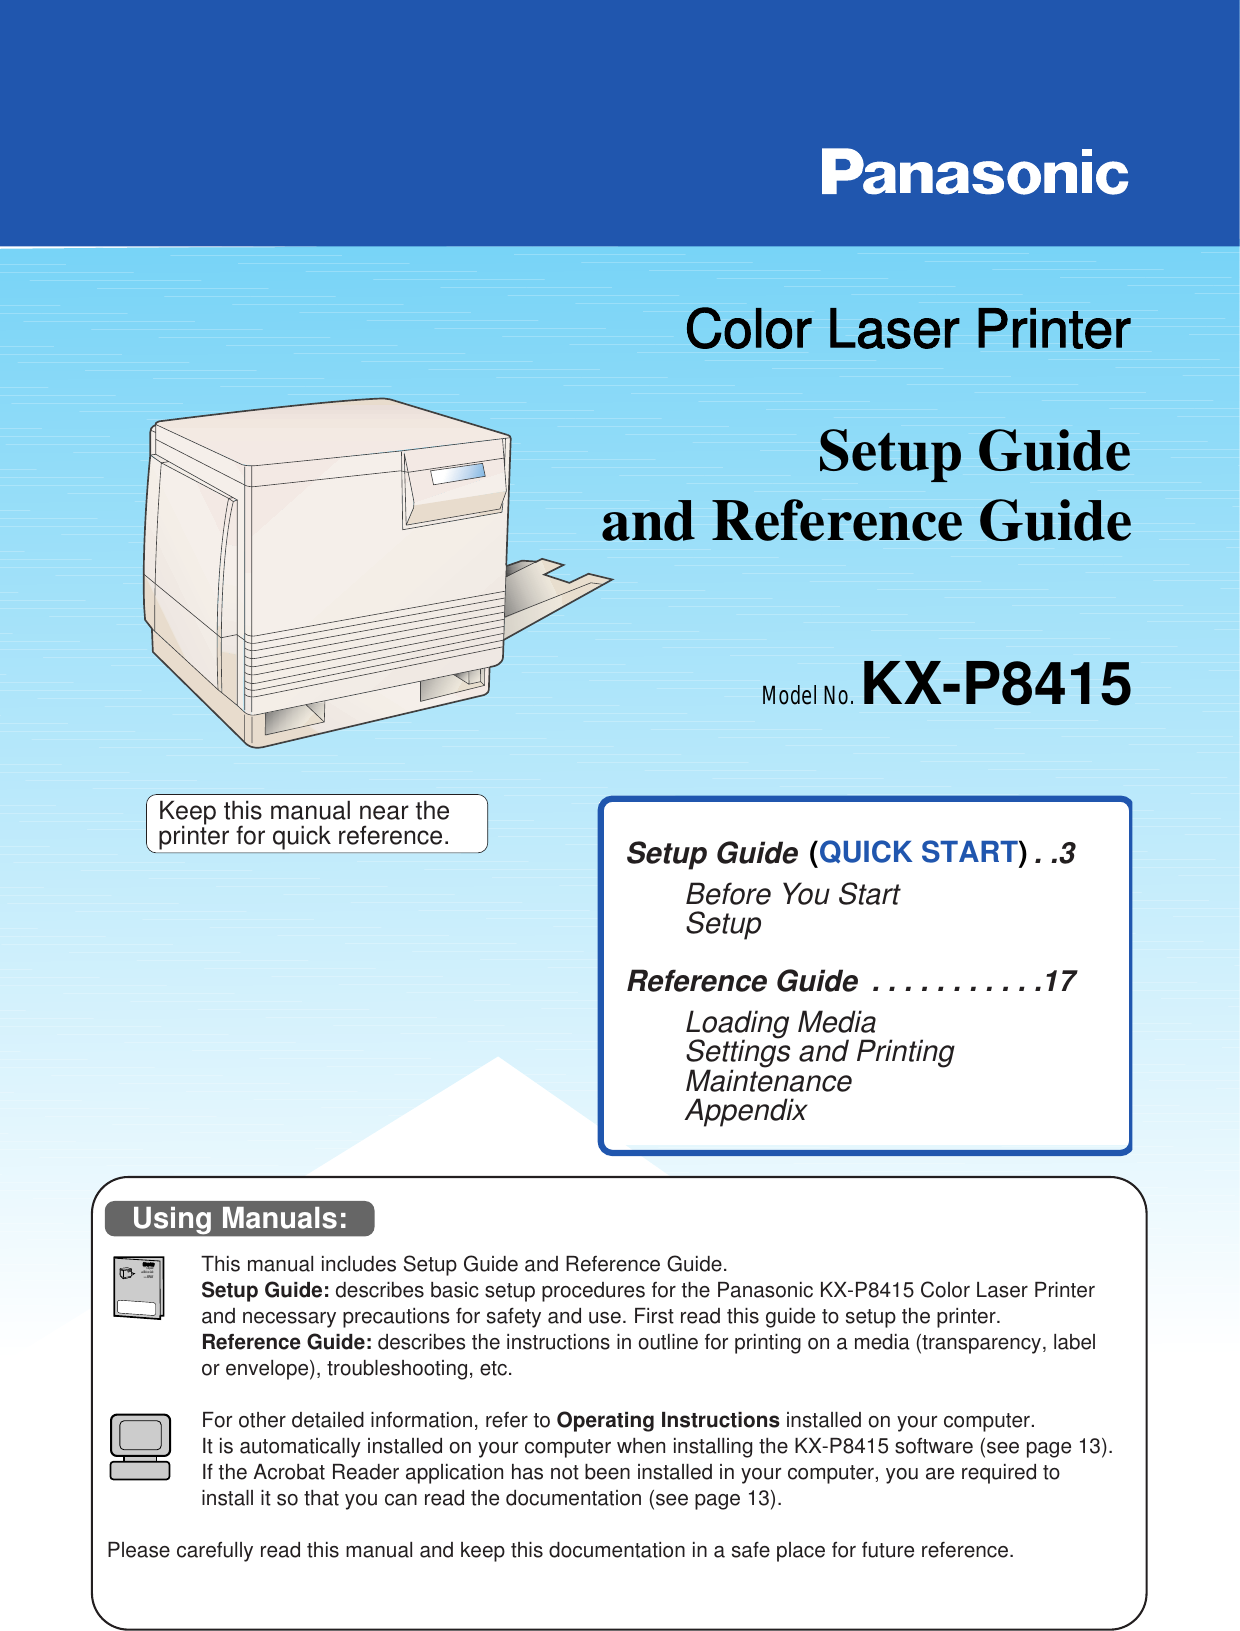 Setup Guide Model No. KX-P8415Color Laser Printerand Reference Guide   Setup Guide   . . . . . . . . . . . . . . .3Before You StartSetupReference Guide  . . . . . . . . . . .17Loading MediaSettings and PrintingMaintenanceAppendixThis manual includes Setup Guide and Reference Guide.Setup Guide: describes basic setup procedures for the Panasonic KX-P8415 Color Laser Printerand necessary precautions for safety and use. First read this guide to setup the printer.Reference Guide: describes the instructions in outline for printing on a media (transparency, labelor envelope), troubleshooting, etc.For other detailed information, refer to Operating Instructions installed on your computer.It is automatically installed on your computer when installing the KX-P8415 software (see page 13).If the Acrobat Reader application has not been installed in your computer, you are required toinstall it so that you can read the documentation (see page 13).Please carefully read this manual and keep this documentation in a safe place for future reference.Keep this manual near theprinter for quick reference.Setup Guide Model No. KX-P8415Color Laser PrinterColor Laser Printerand Reference Guide   Using Manuals:(QUICK START)